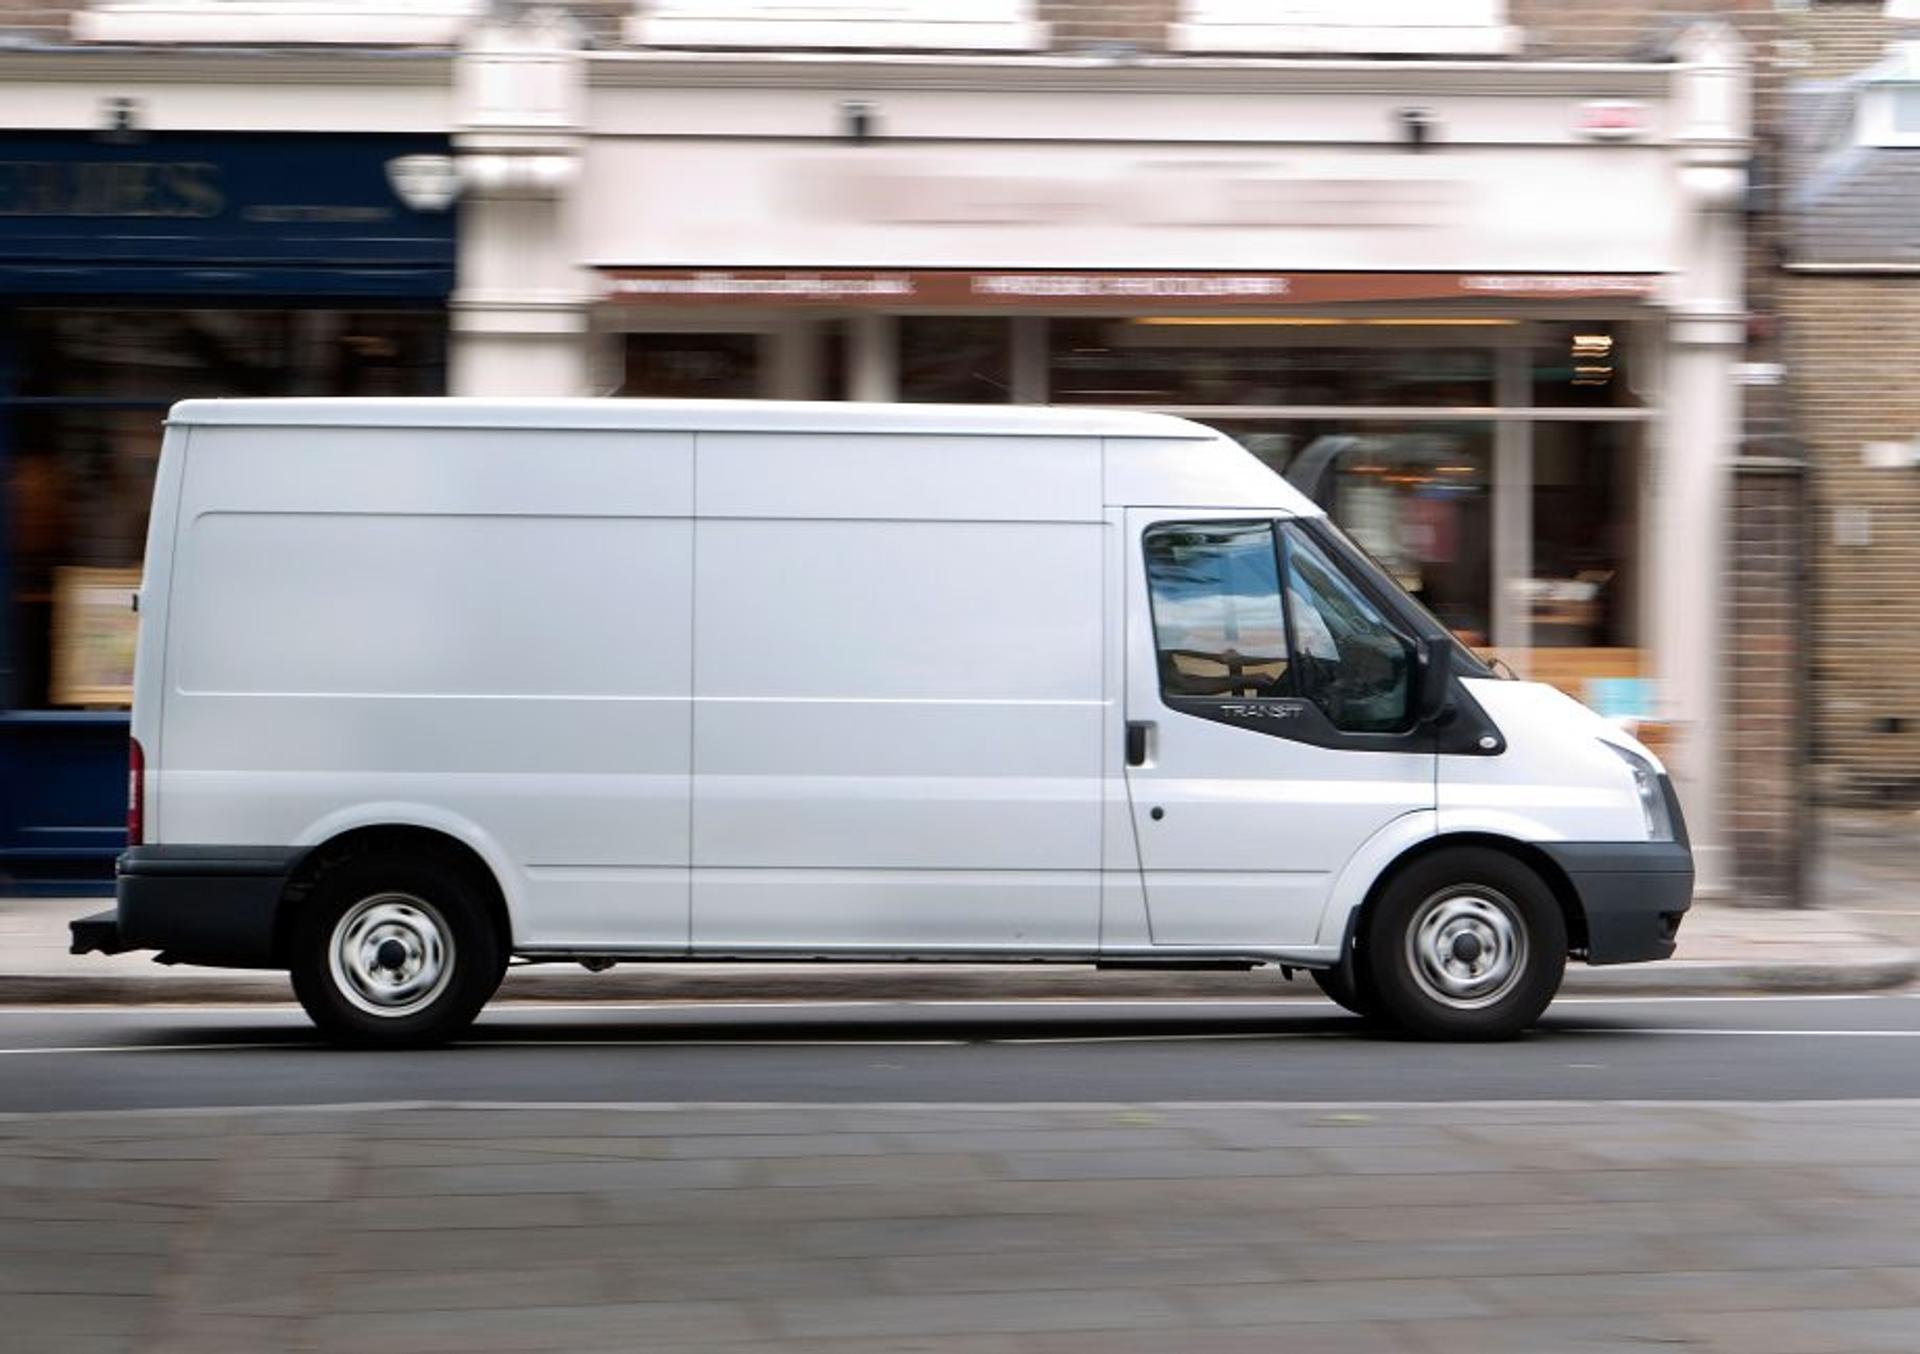 What options does Zego offer for courier van drivers?